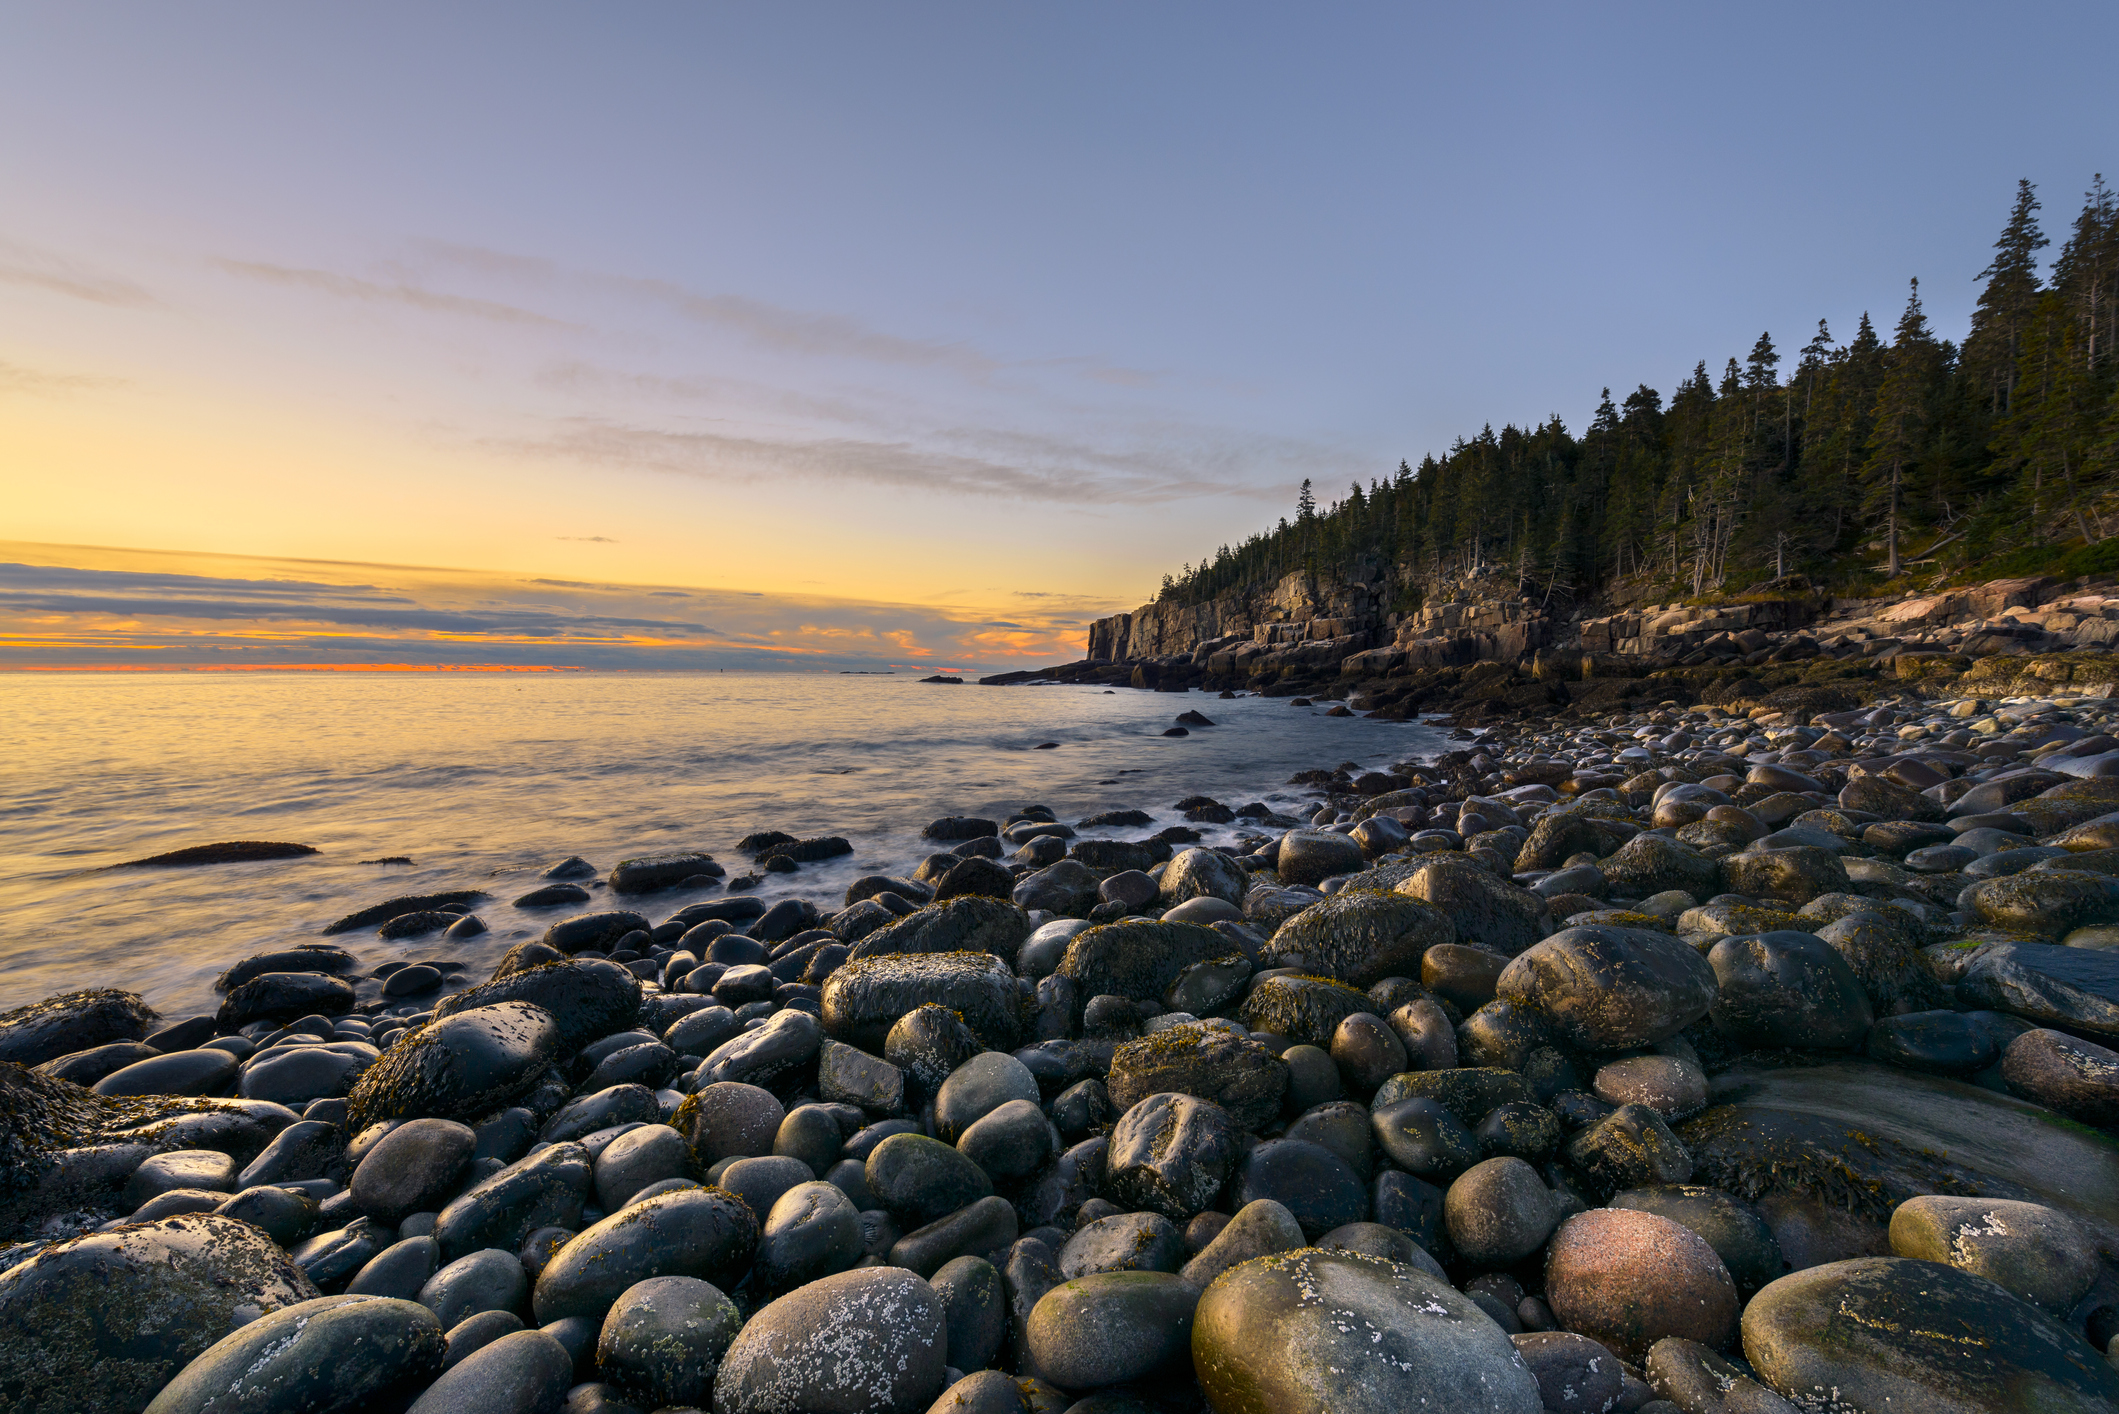 Acadia National Park is one of the top 10 most popular national parks in the U.S.